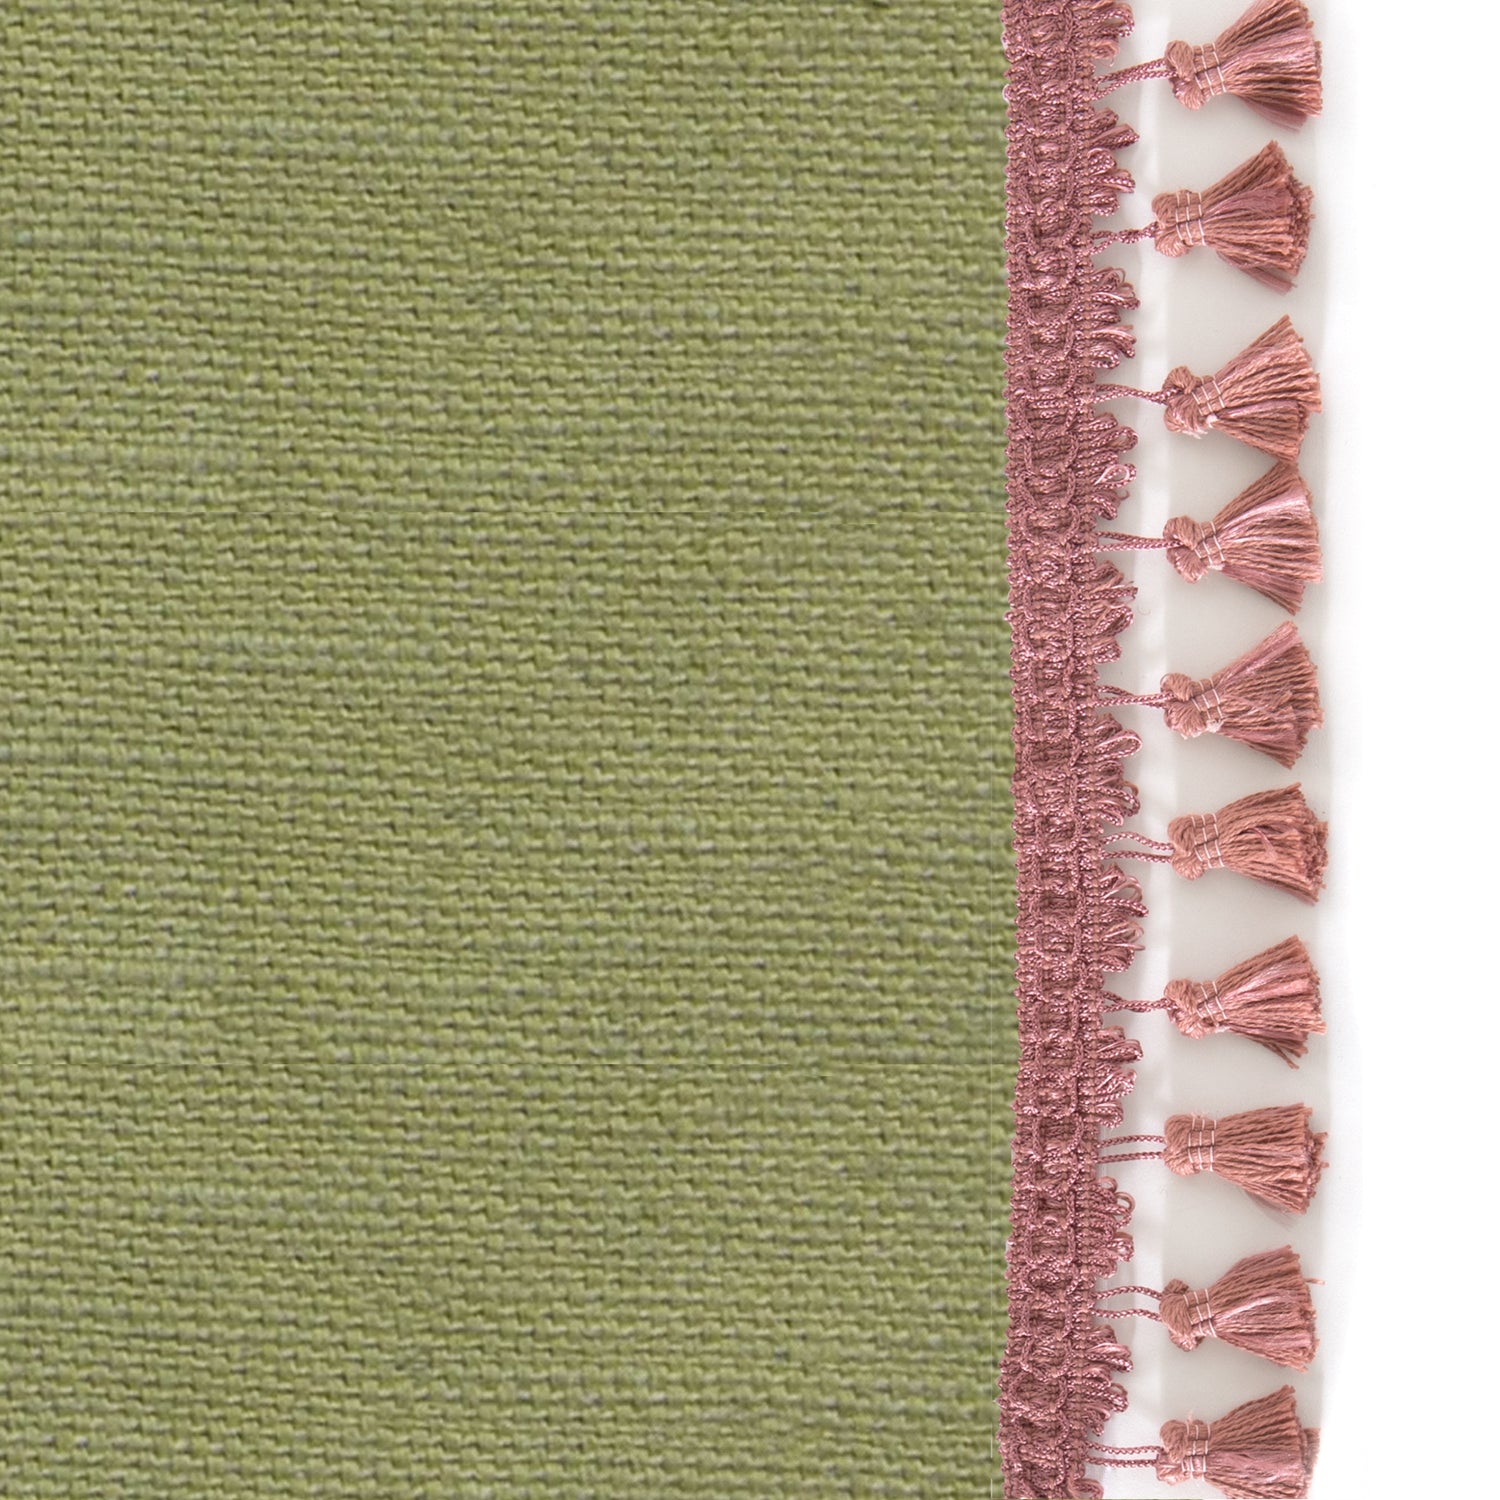 Upclose picture of Moss custom Moss Green Linencurtain with dusty rose tassel trim